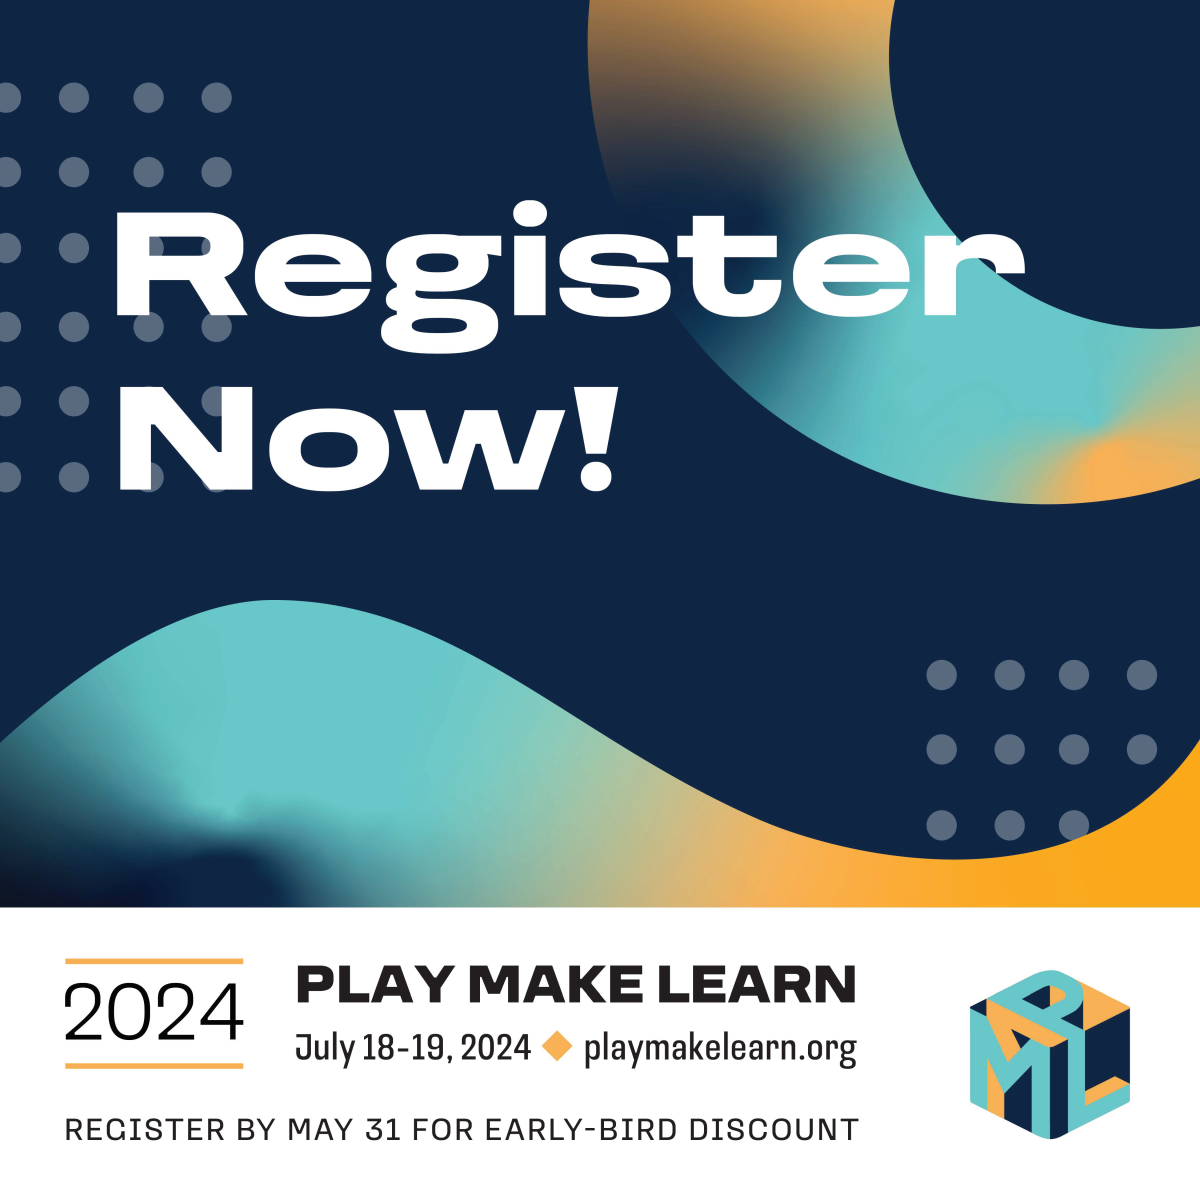 Register now for the 2024 Play Make Learn conference!